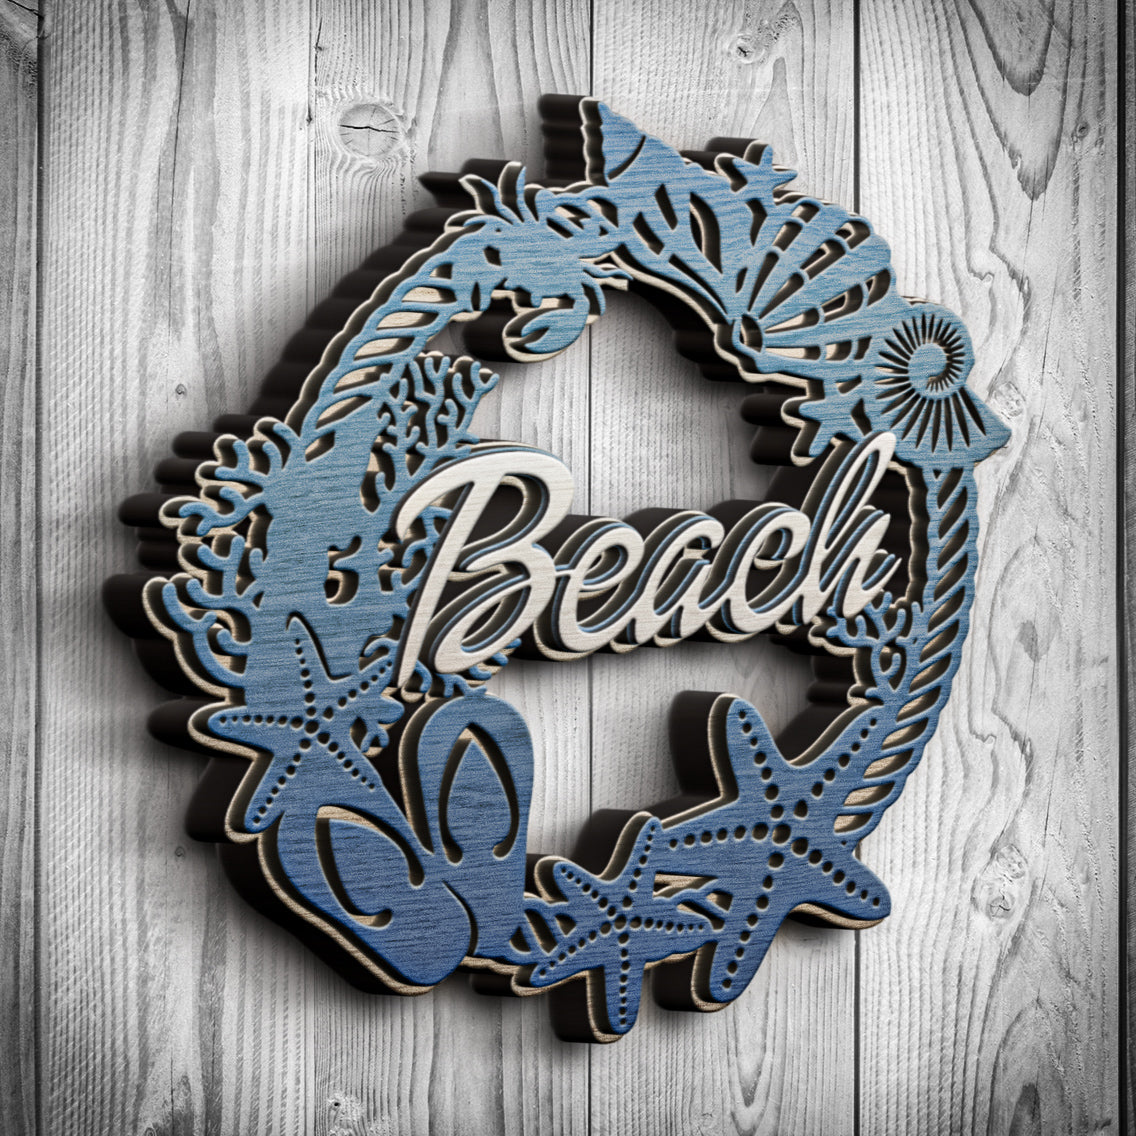 Seashells beach wreath, layered files, cottage decoration. Layered laser files. SVG JPEG DXF files. Template for paper cutting, laser cutting. For use with Cricut, Glowforge, Silhouette Cameo, CNC machines. 